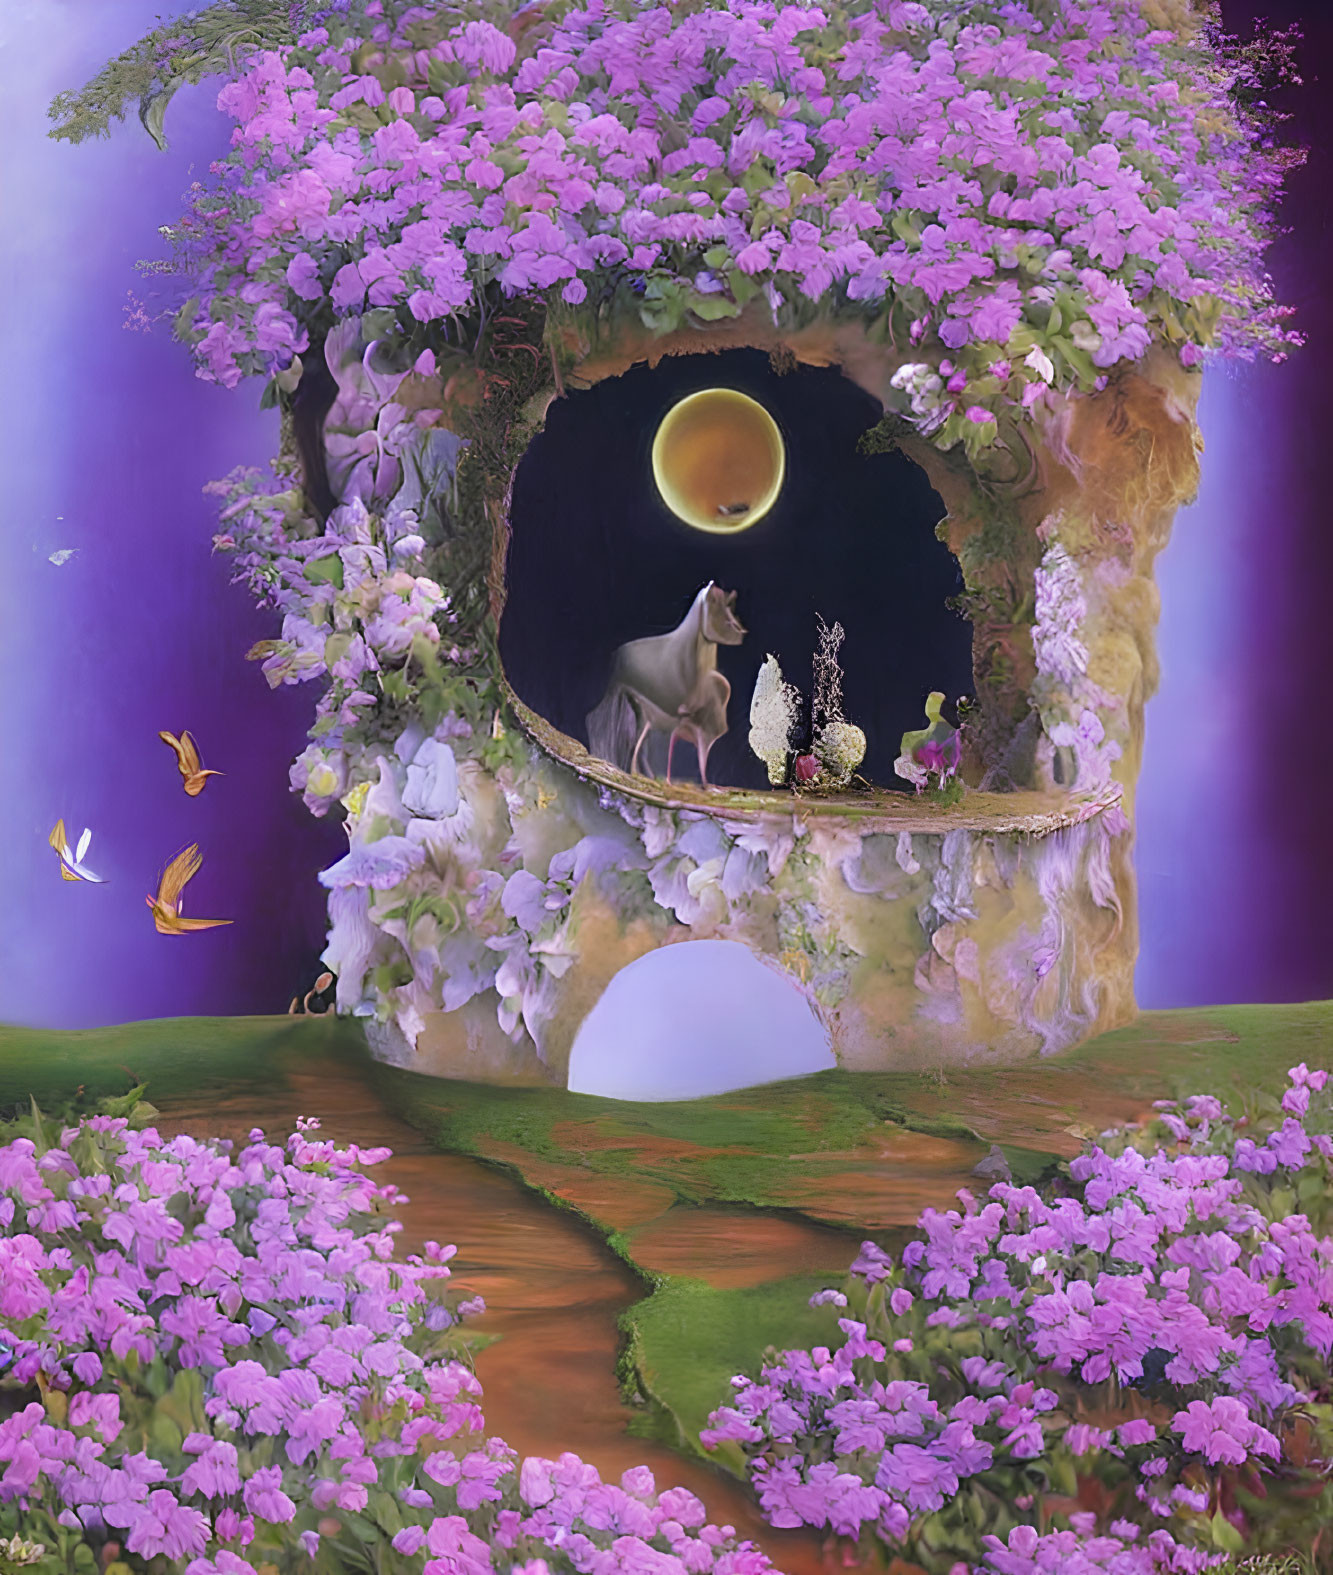 Moonlit Fantasy Landscape with Wolf, Archway, Butterflies, and Flowers